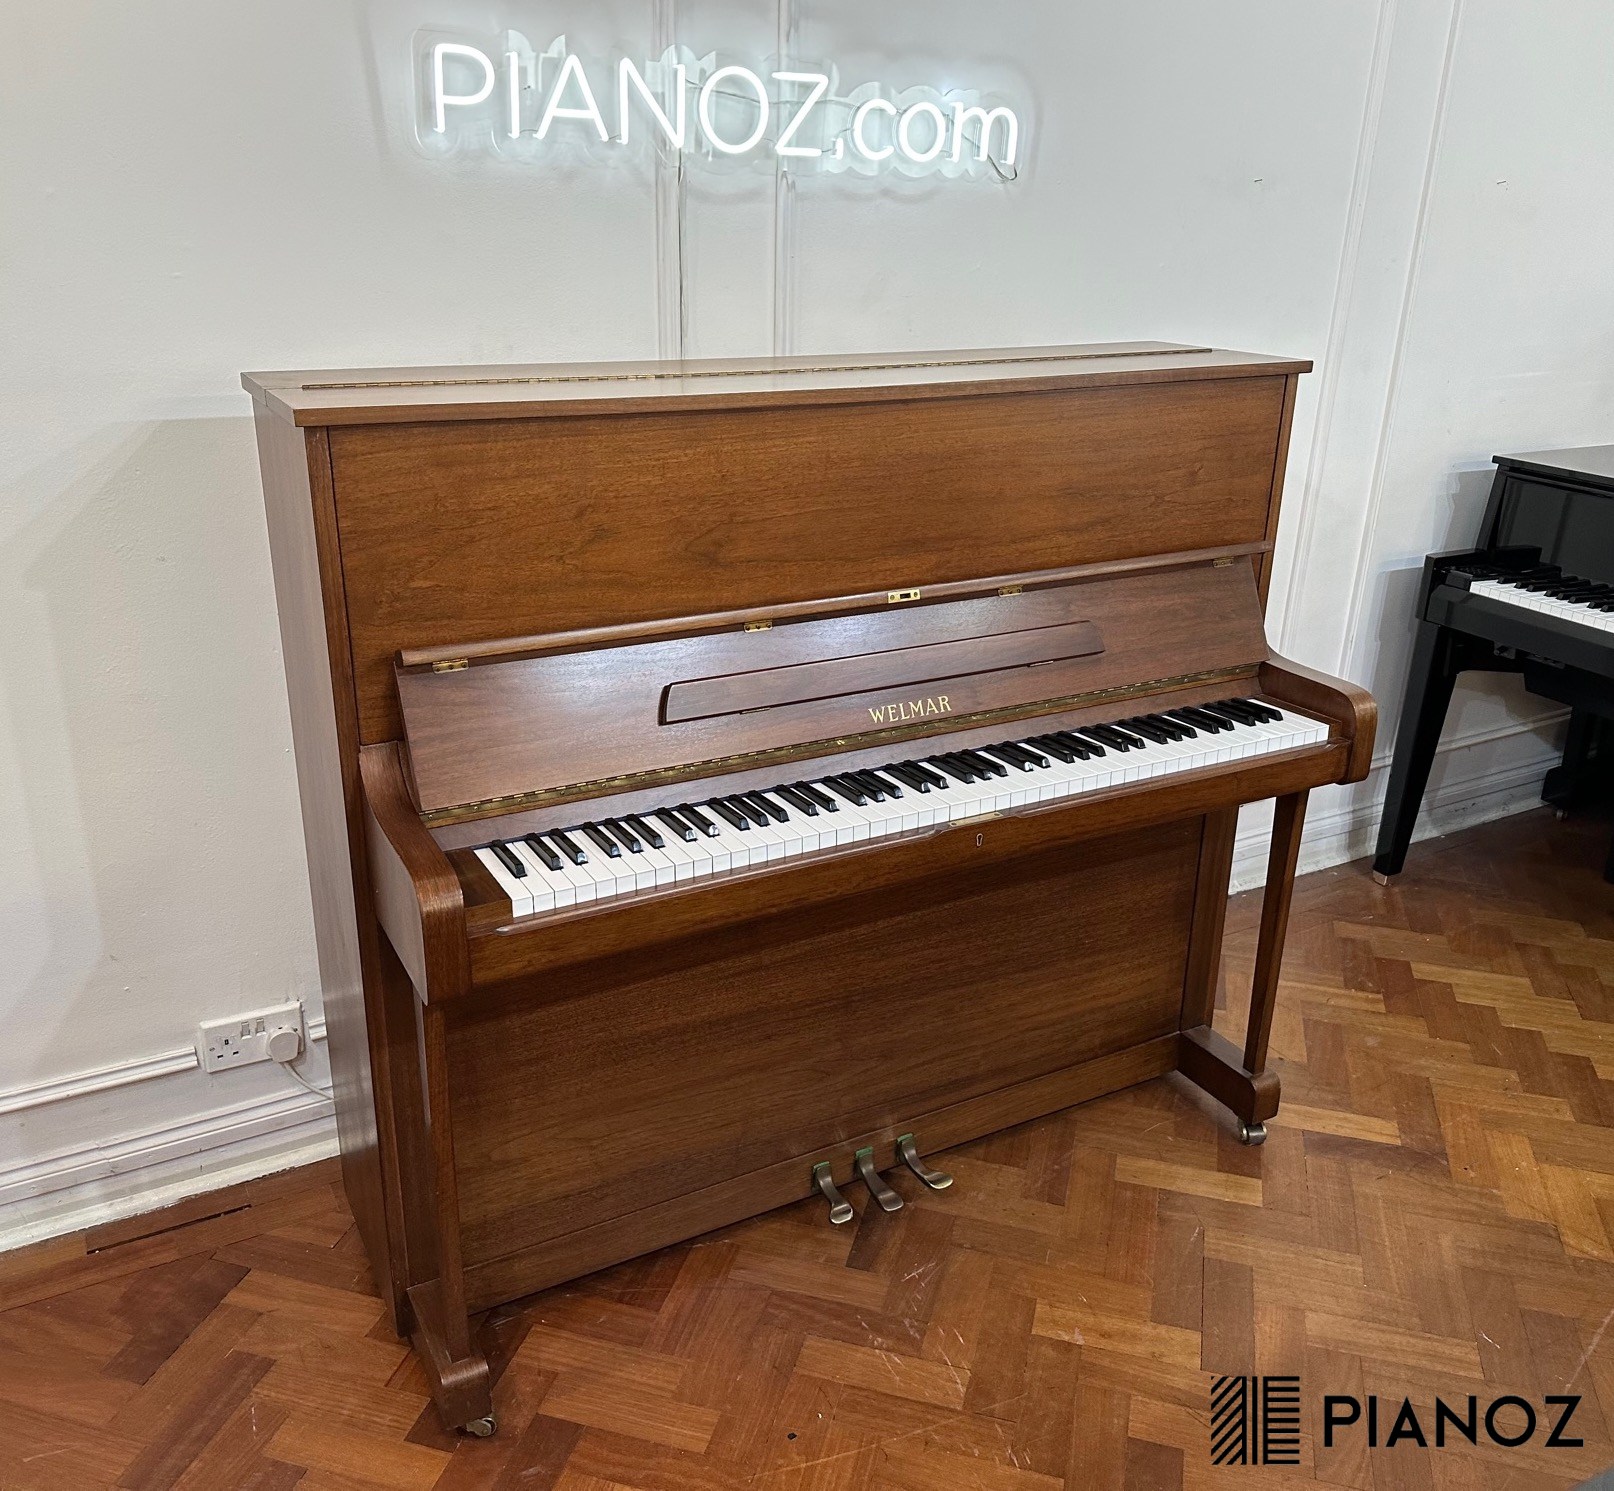 Welmar 125 Professional Upright Piano piano for sale in UK